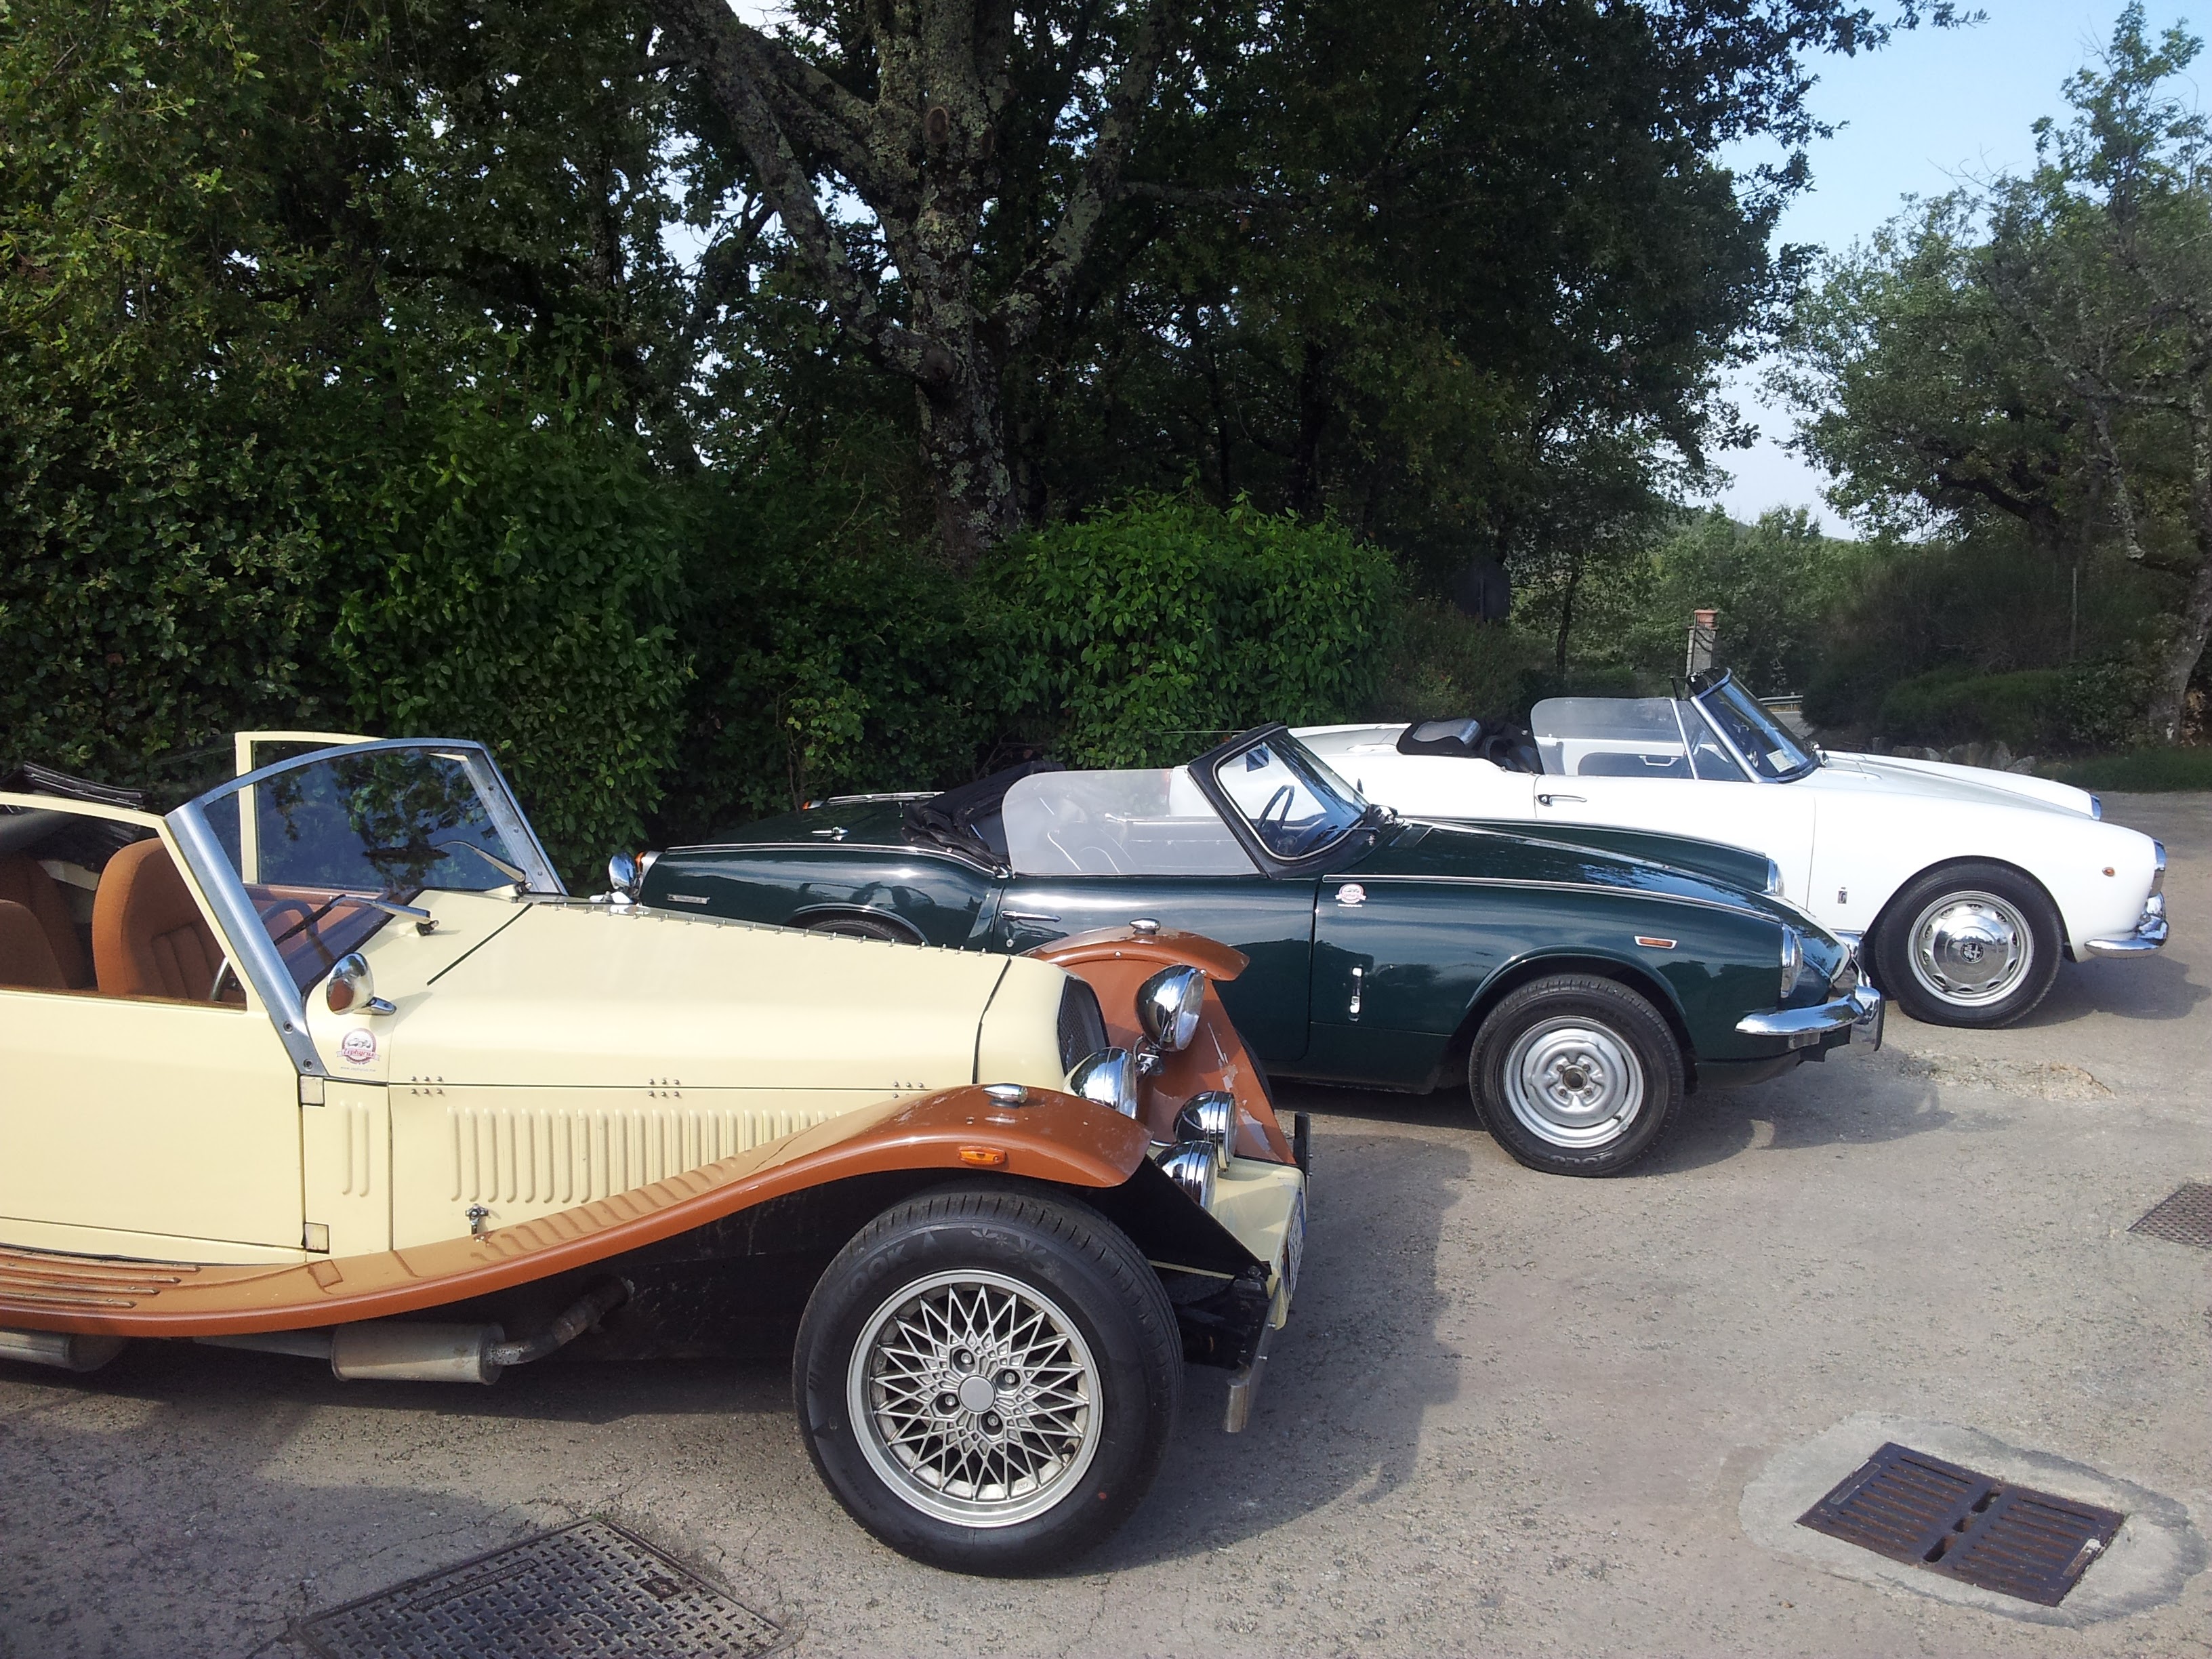 Tuscany vintage and classic cars driving tours | Corporate Retreat